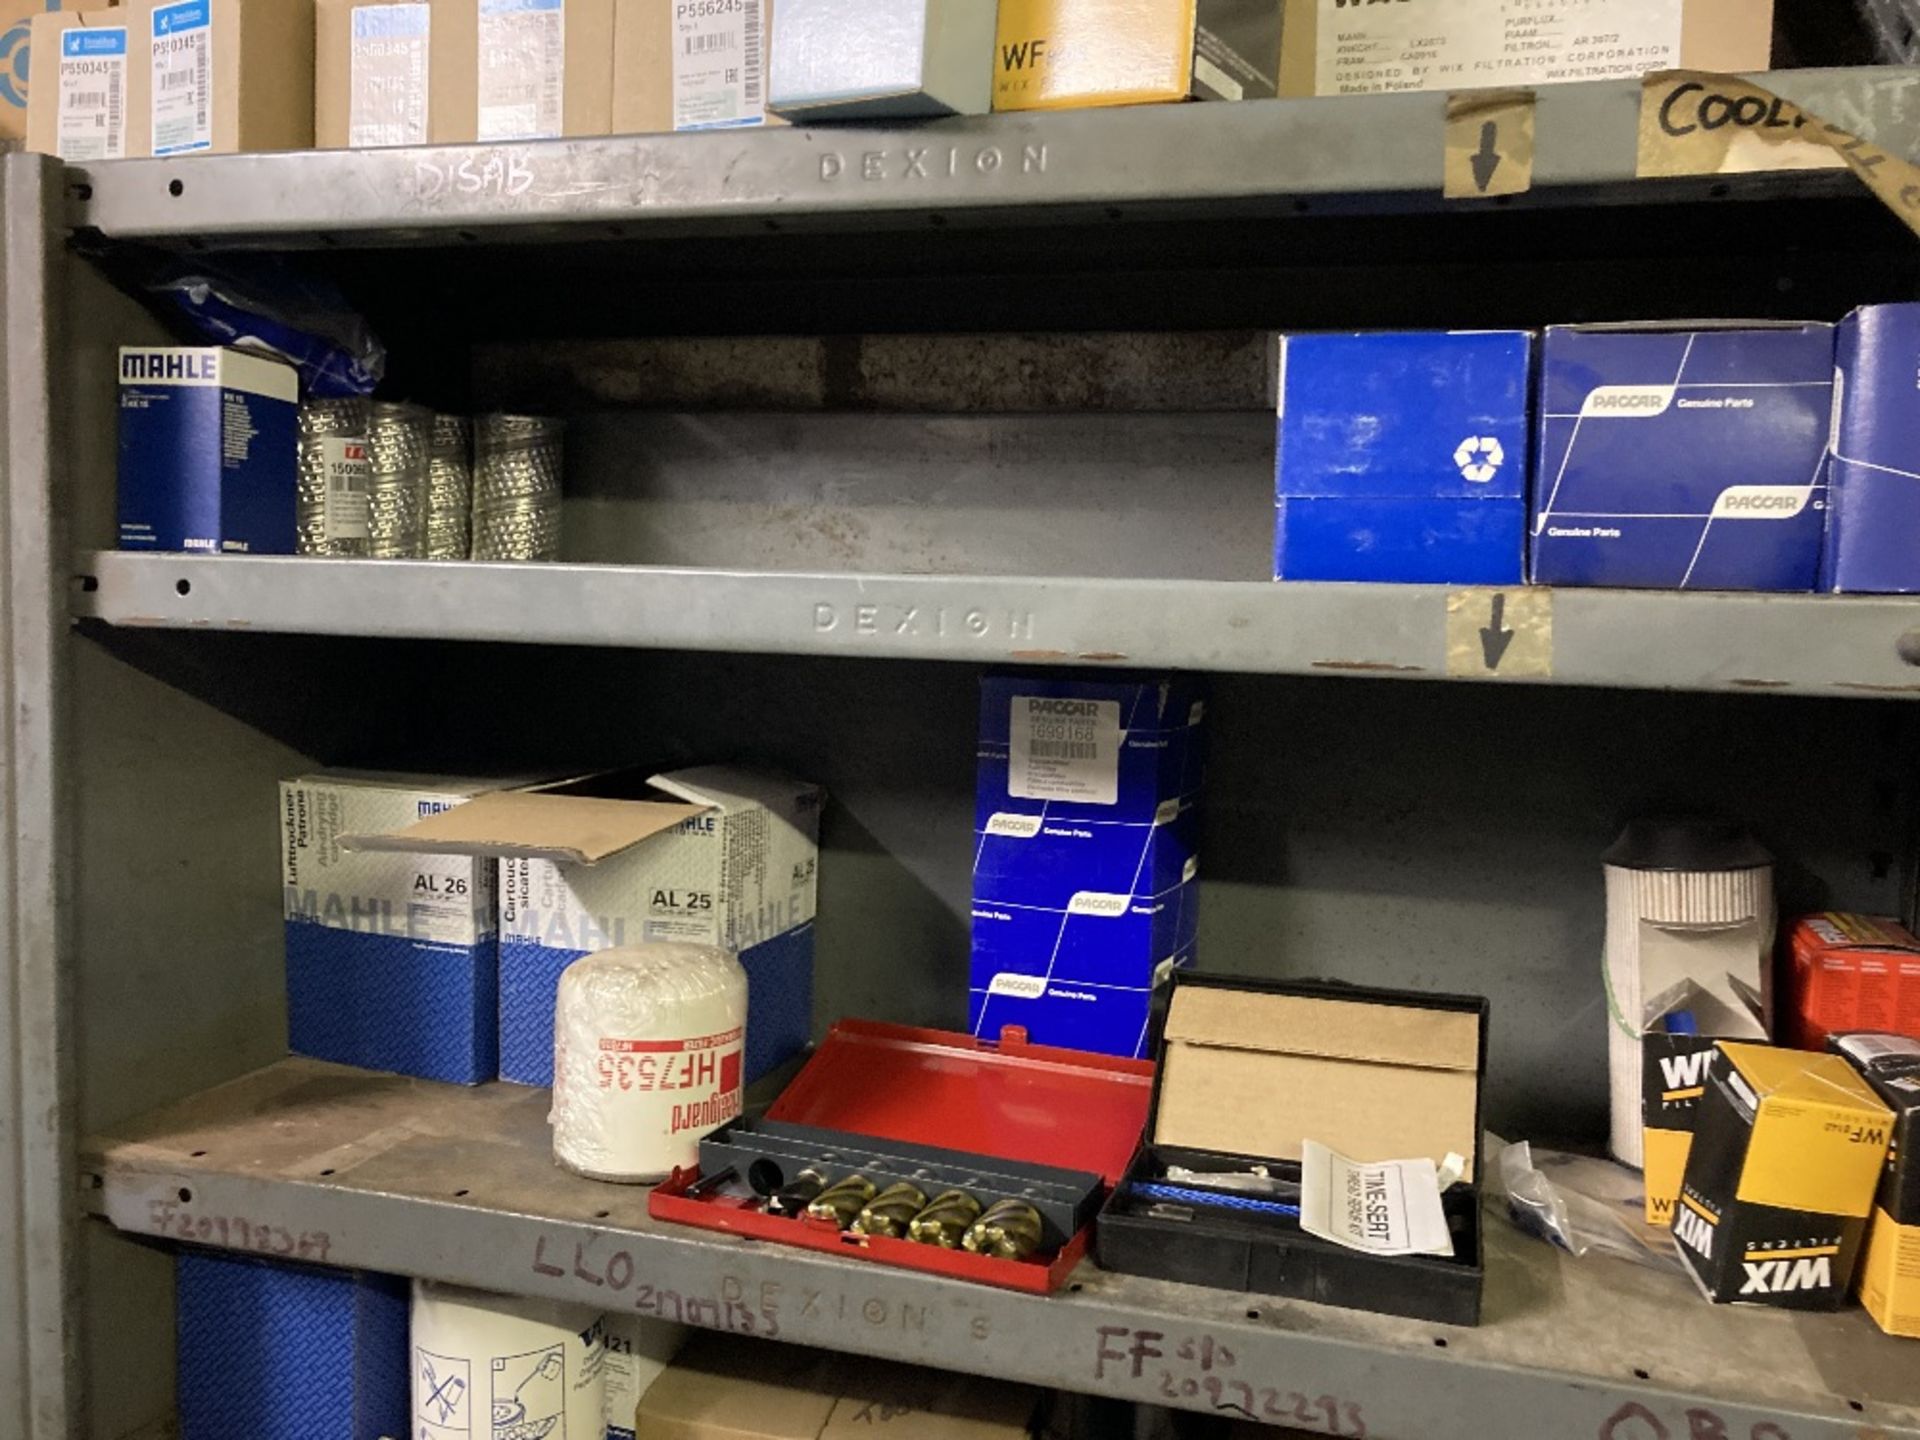 Content of Parts Room Containing Large Quantity of Various Parts & Components - Image 64 of 150